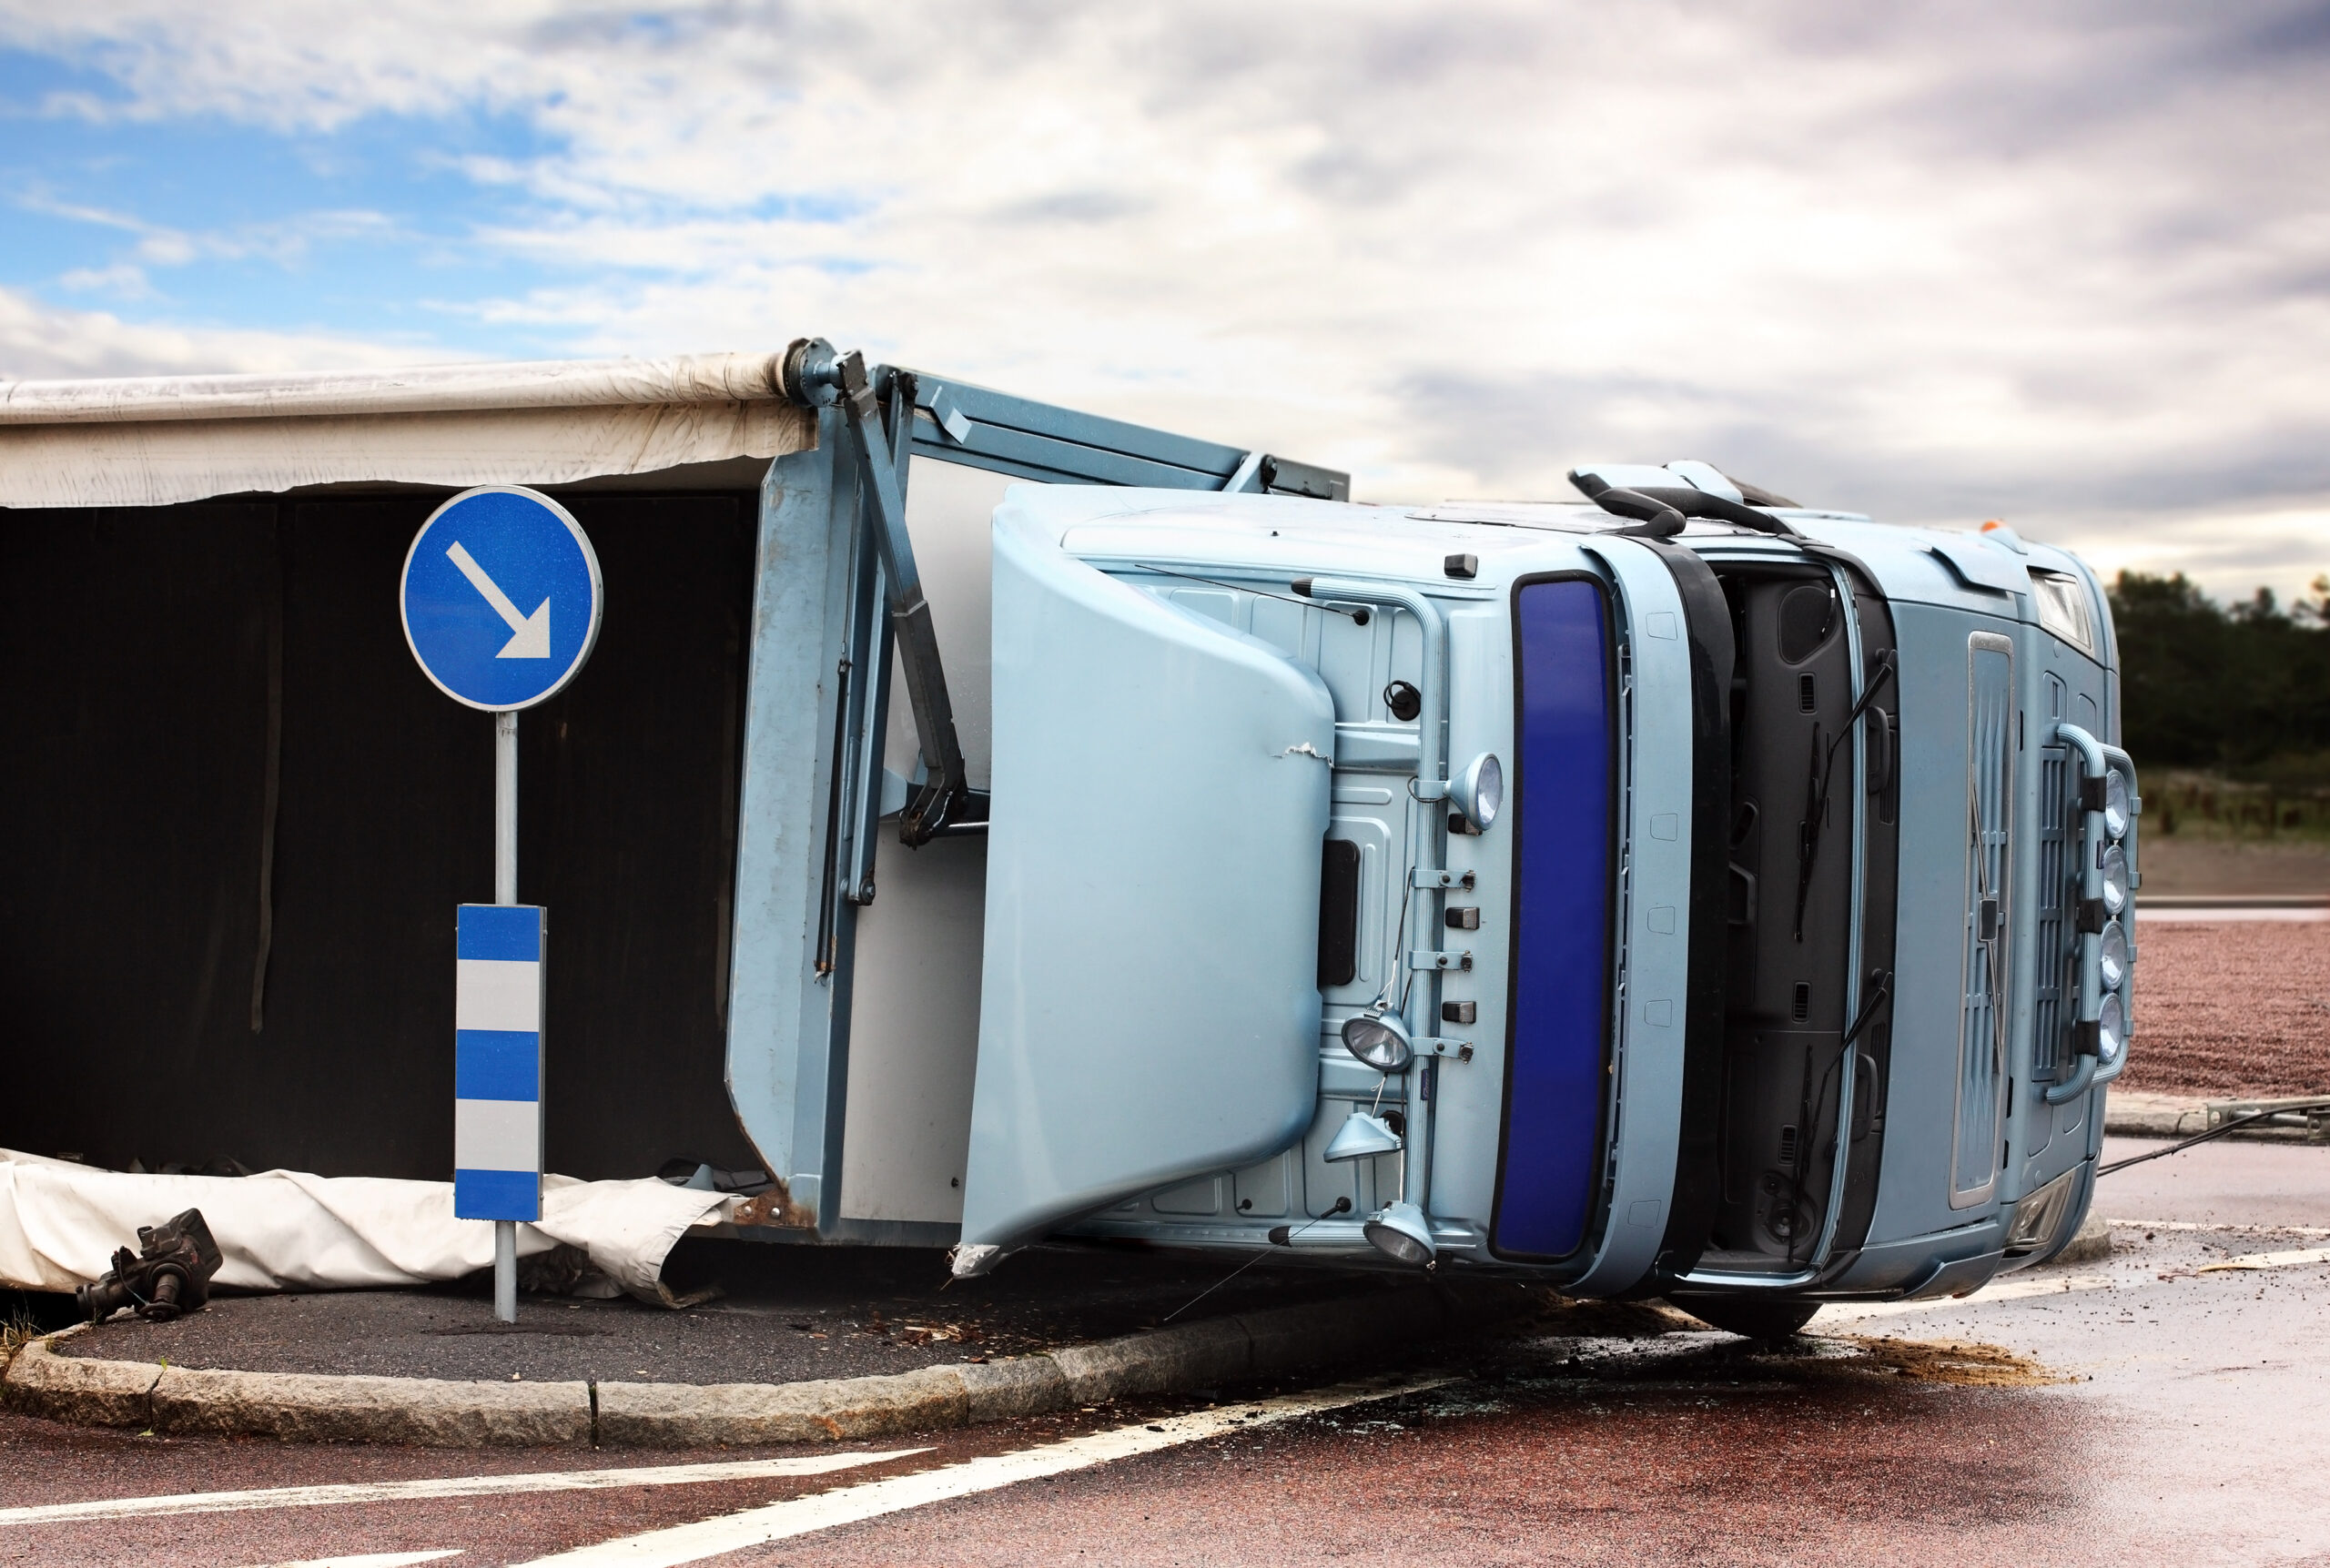 If I'm in a Wisconsin Truck Accident, Who is Responsible for My Injuries?